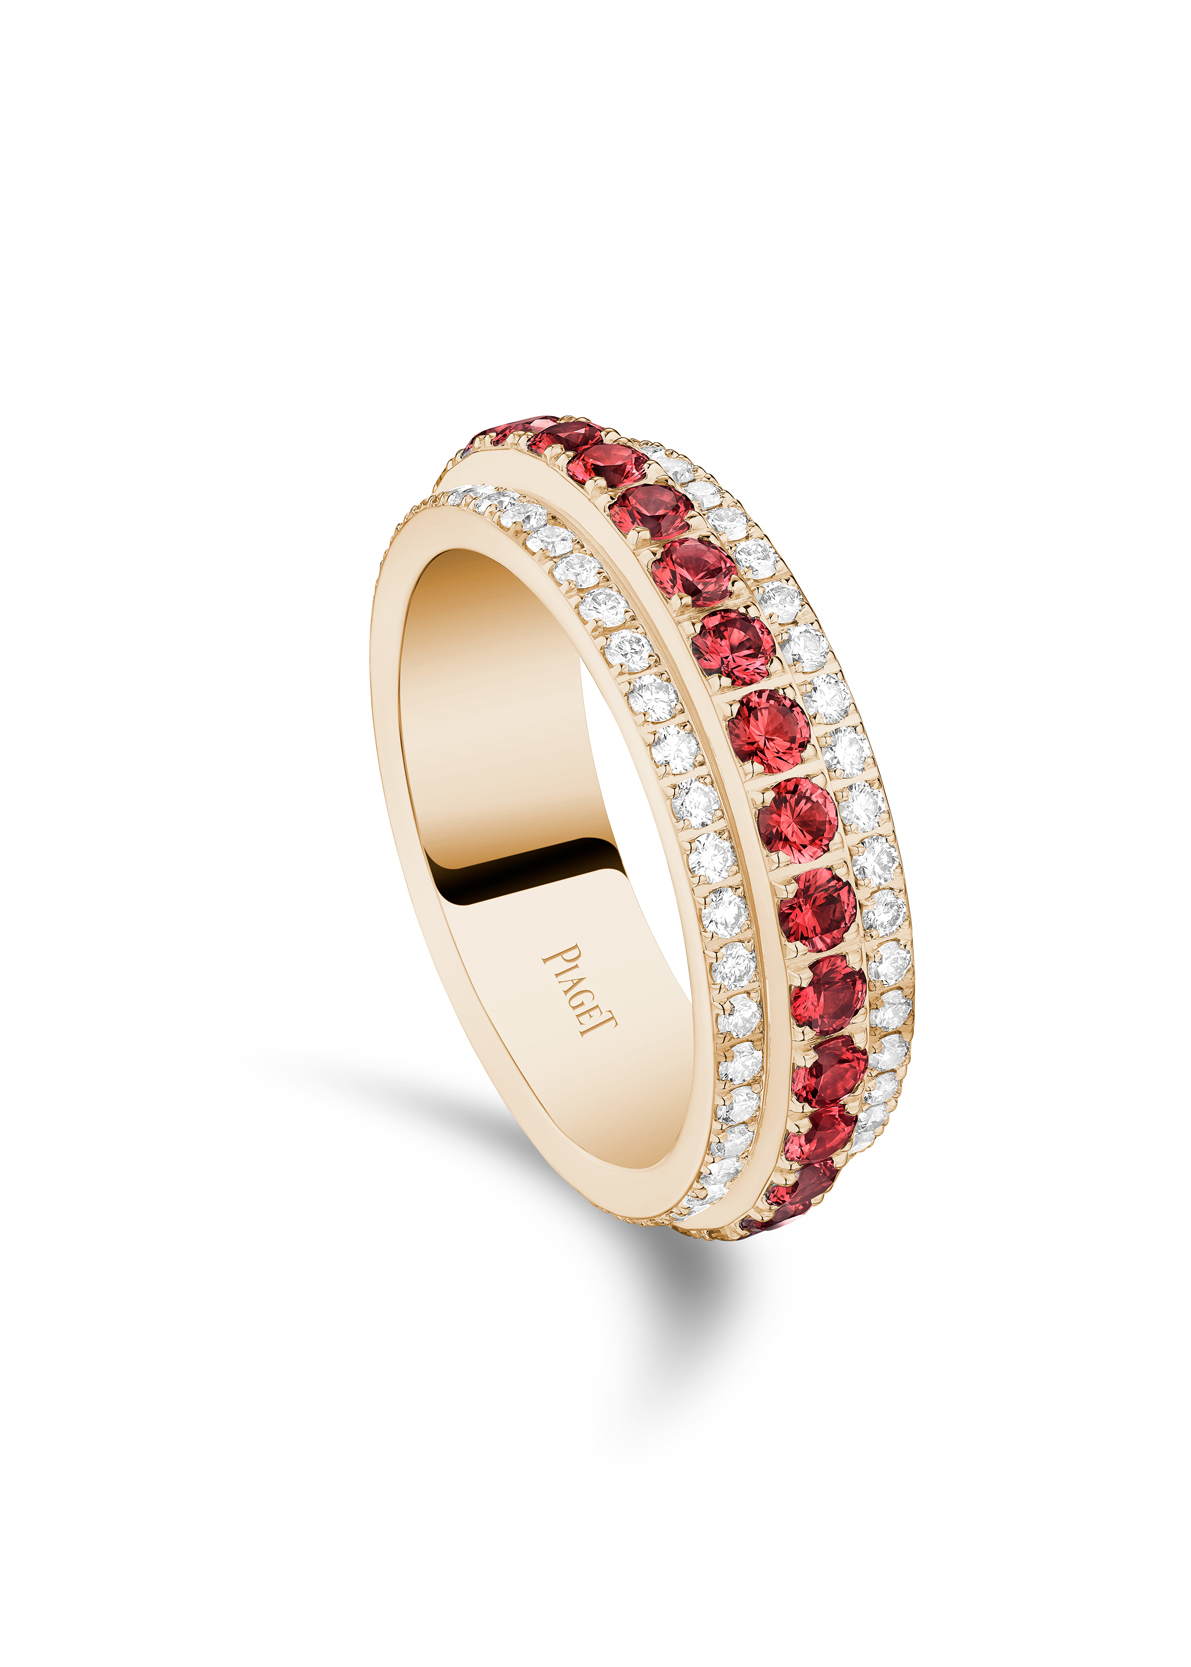 POSSESSION RING BY PIAGET